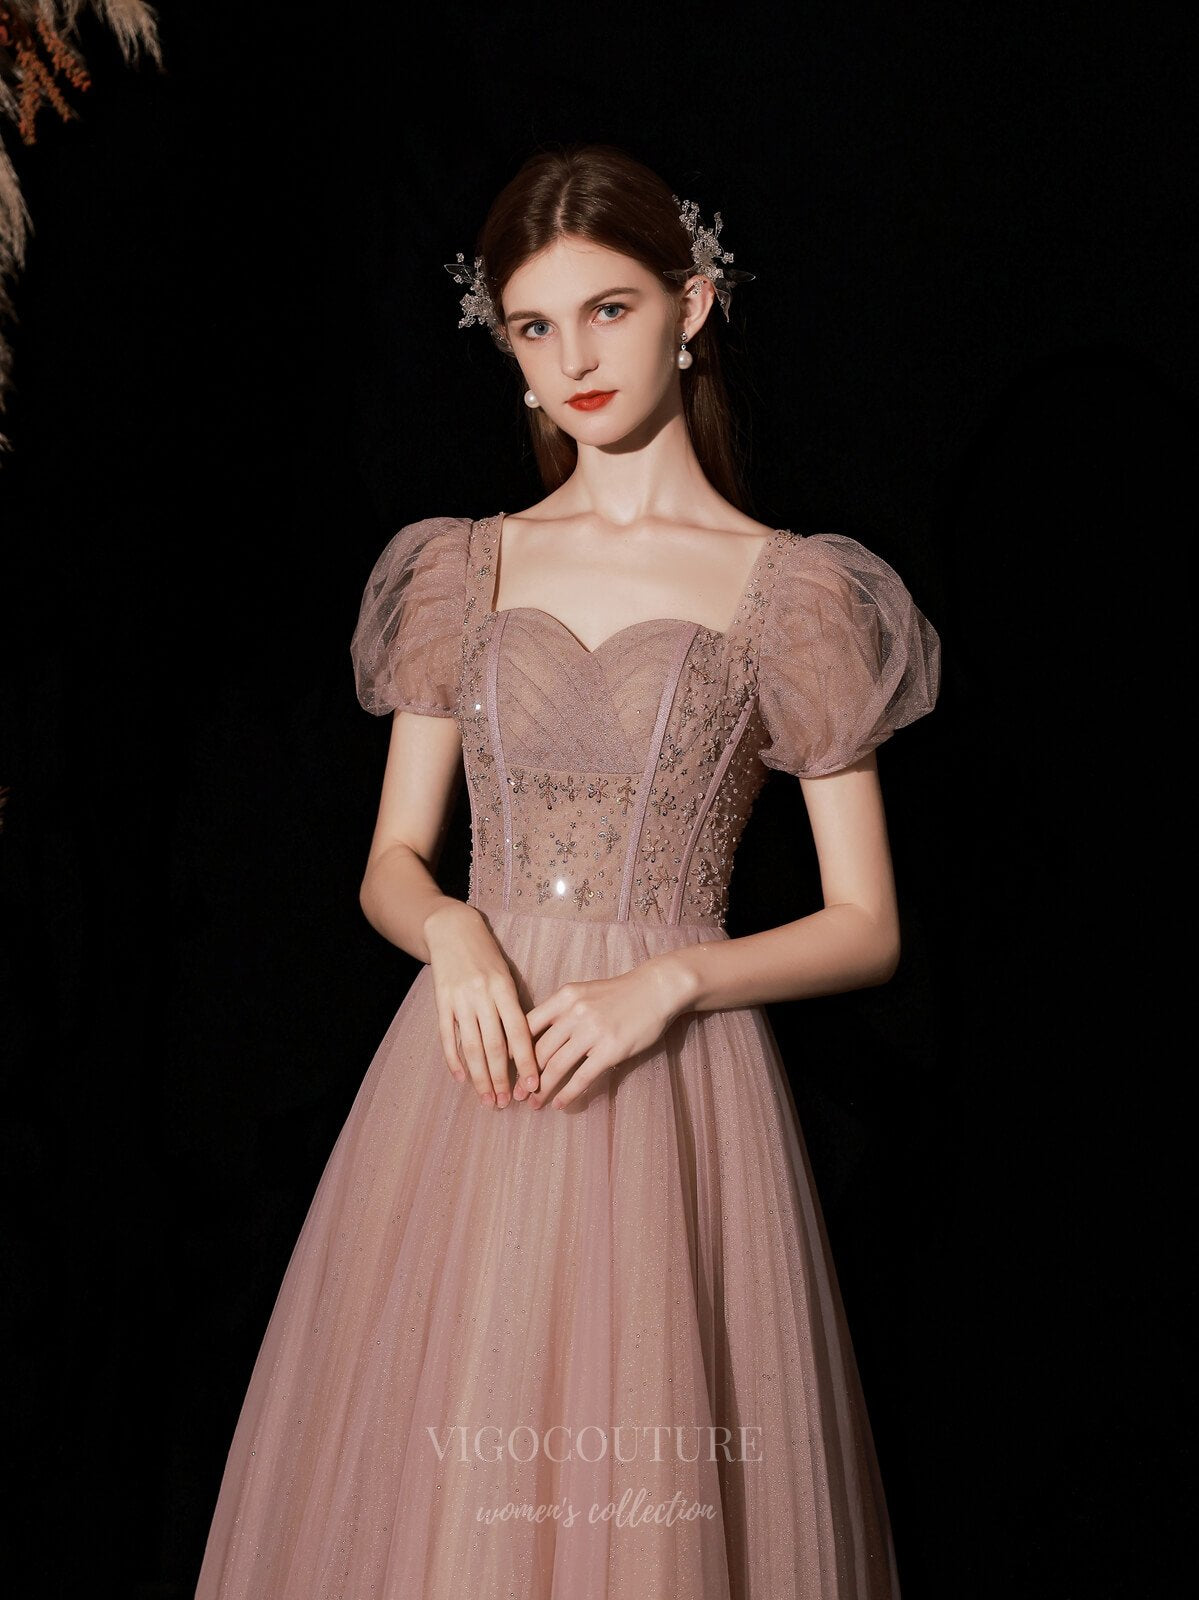 vigocouture-Blush Puffed Sleeve Sparkly Tulle Prom Dress 20740-Prom Dresses-vigocouture-